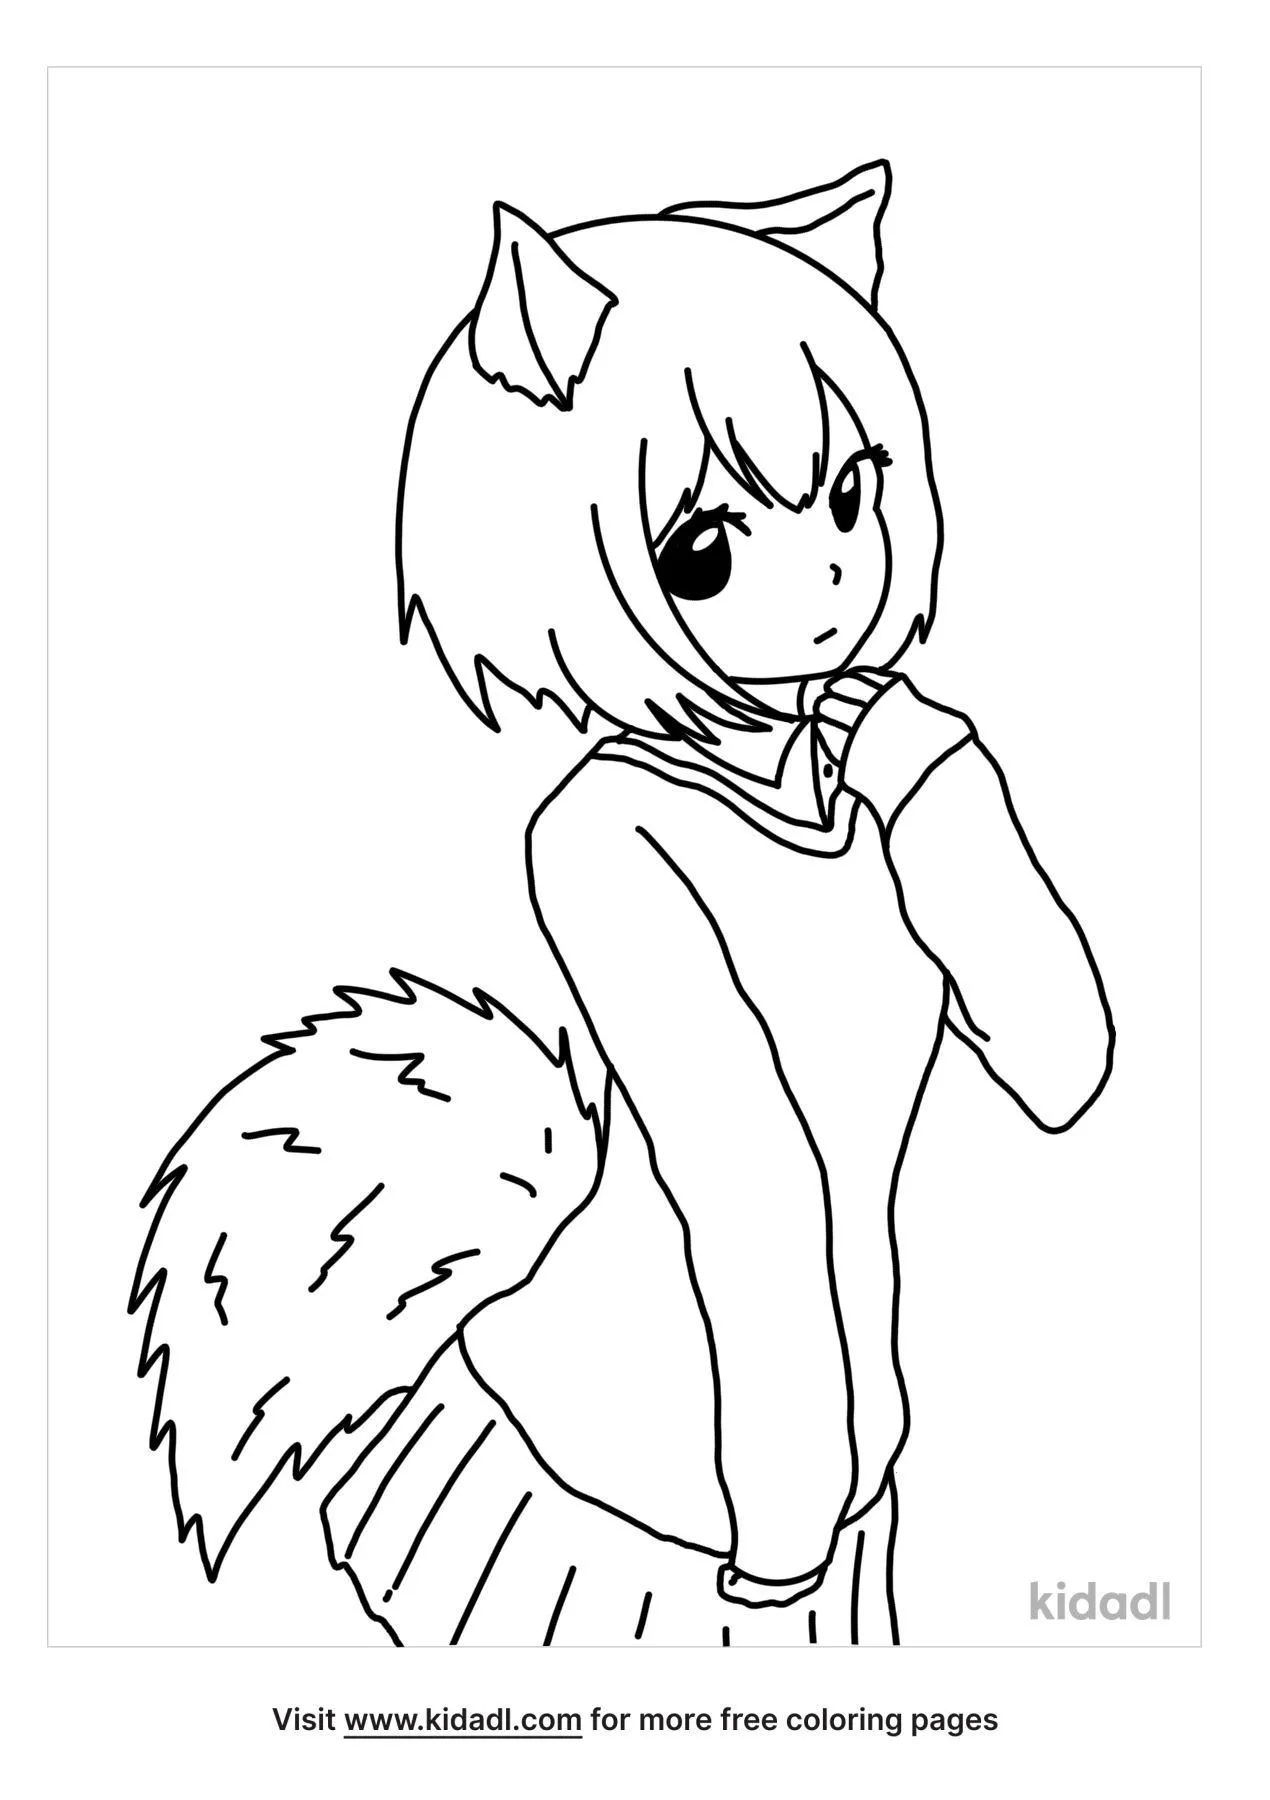 Free Anime Wolf Girl Coloring Page | Coloring Page Printables | Kidadl